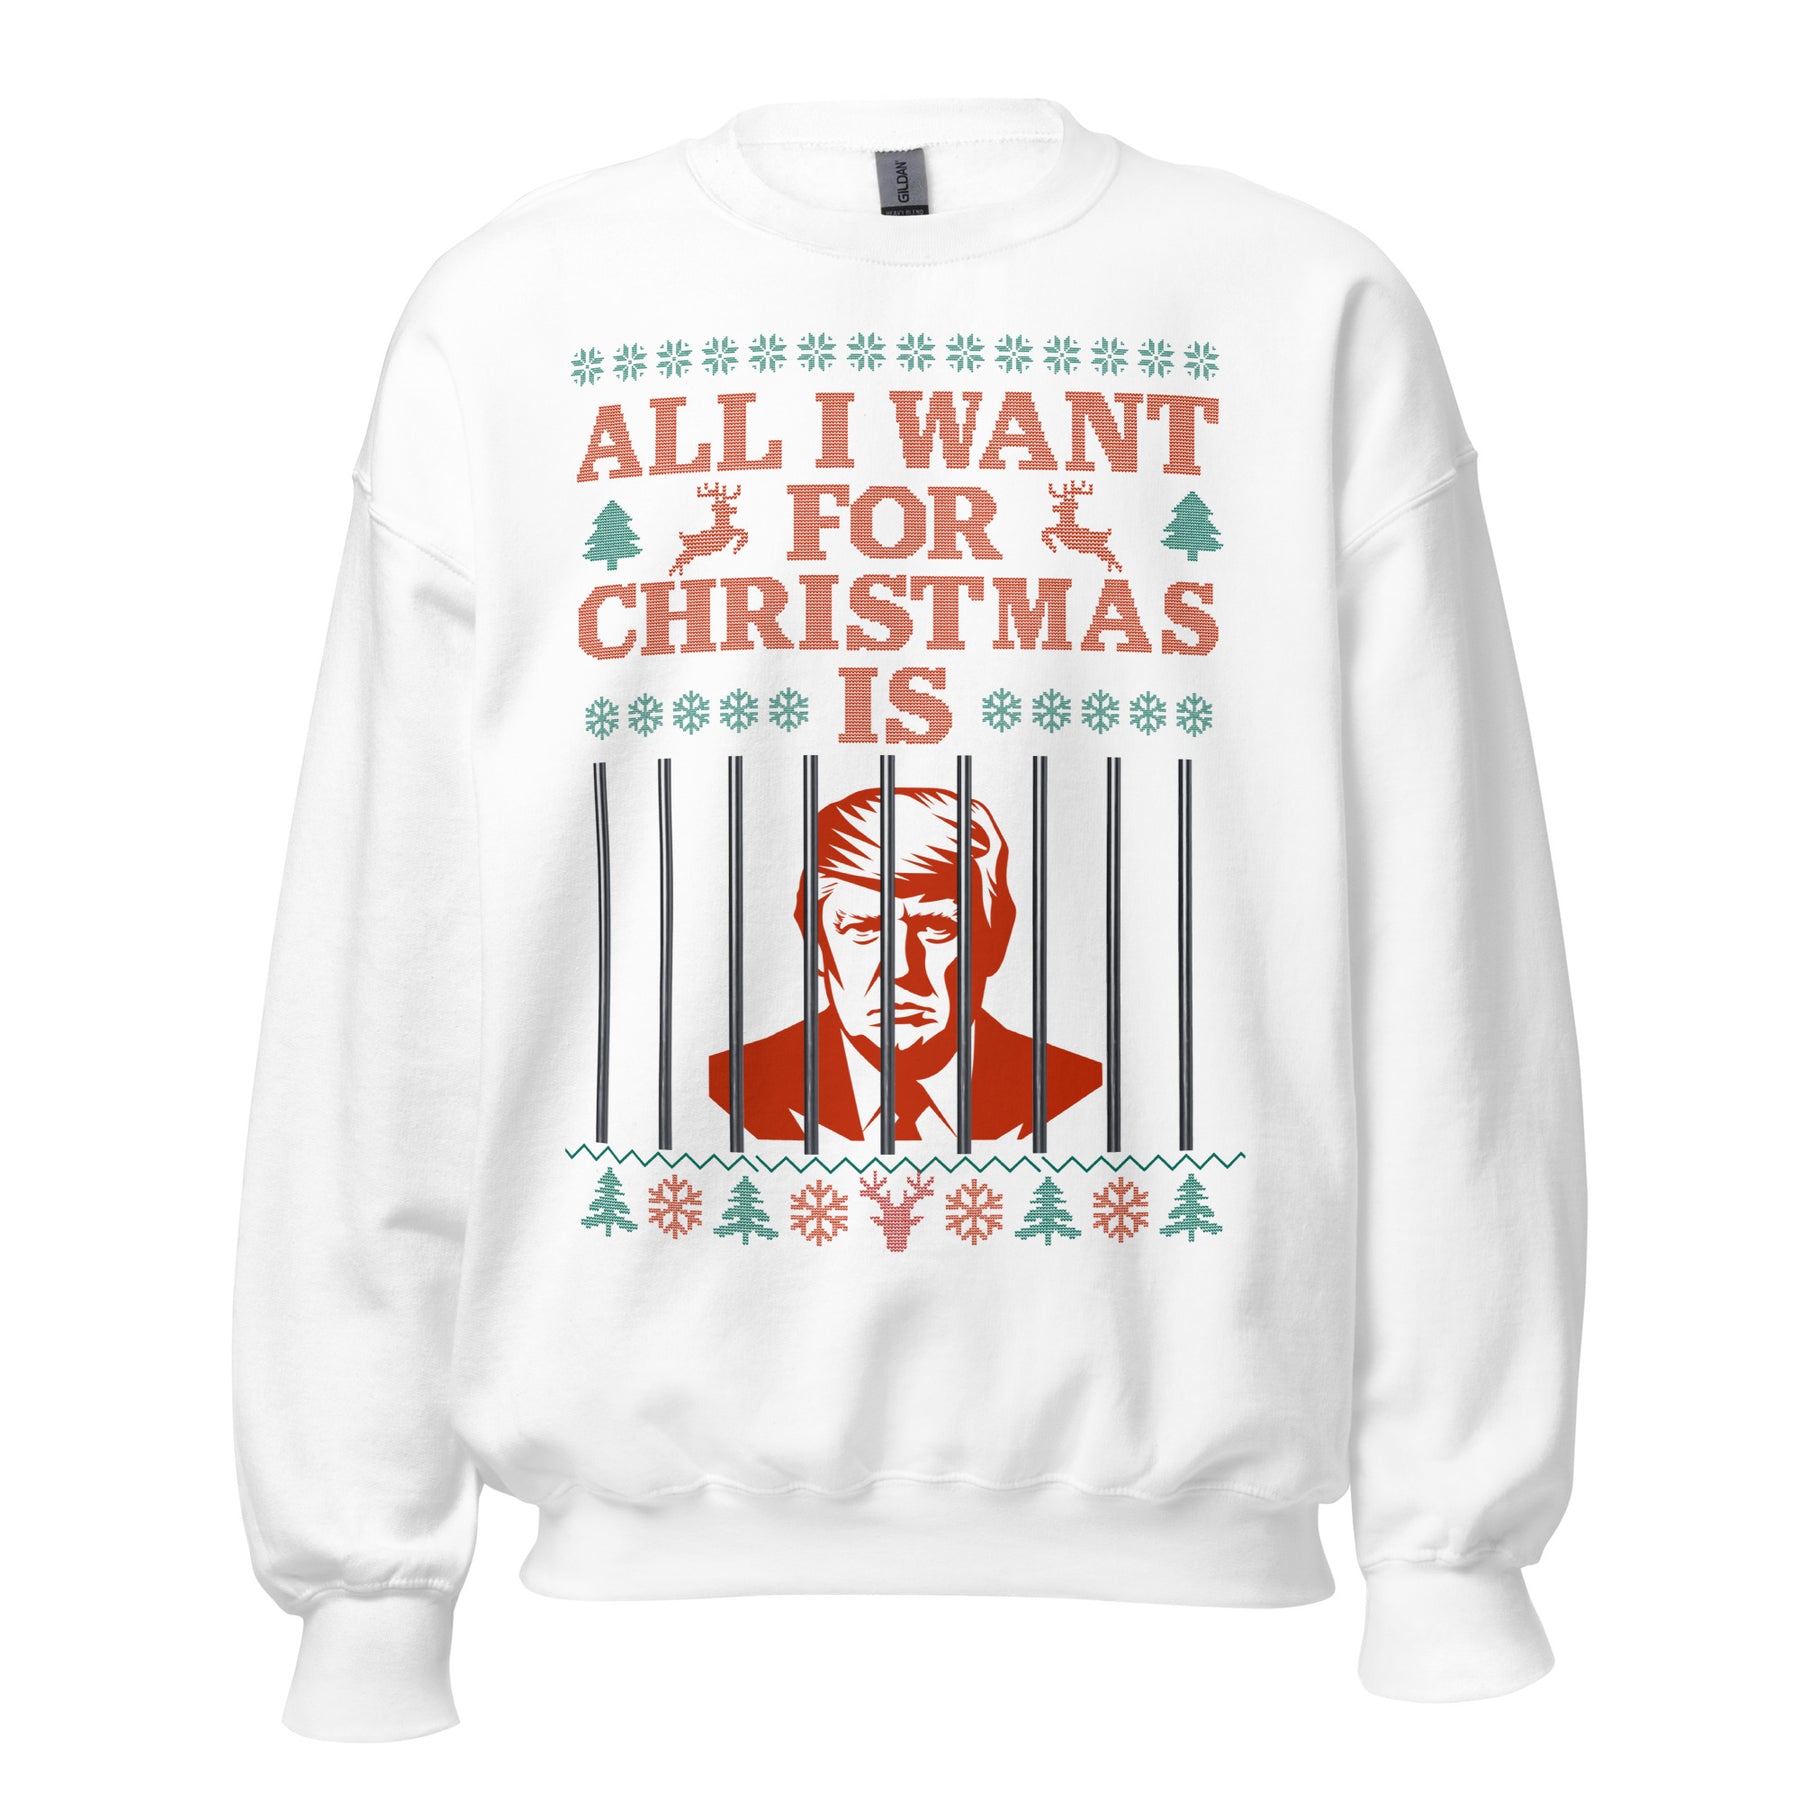 All I Want For Christmas is Trump in Jail Ugly Christmas Sweatshirt